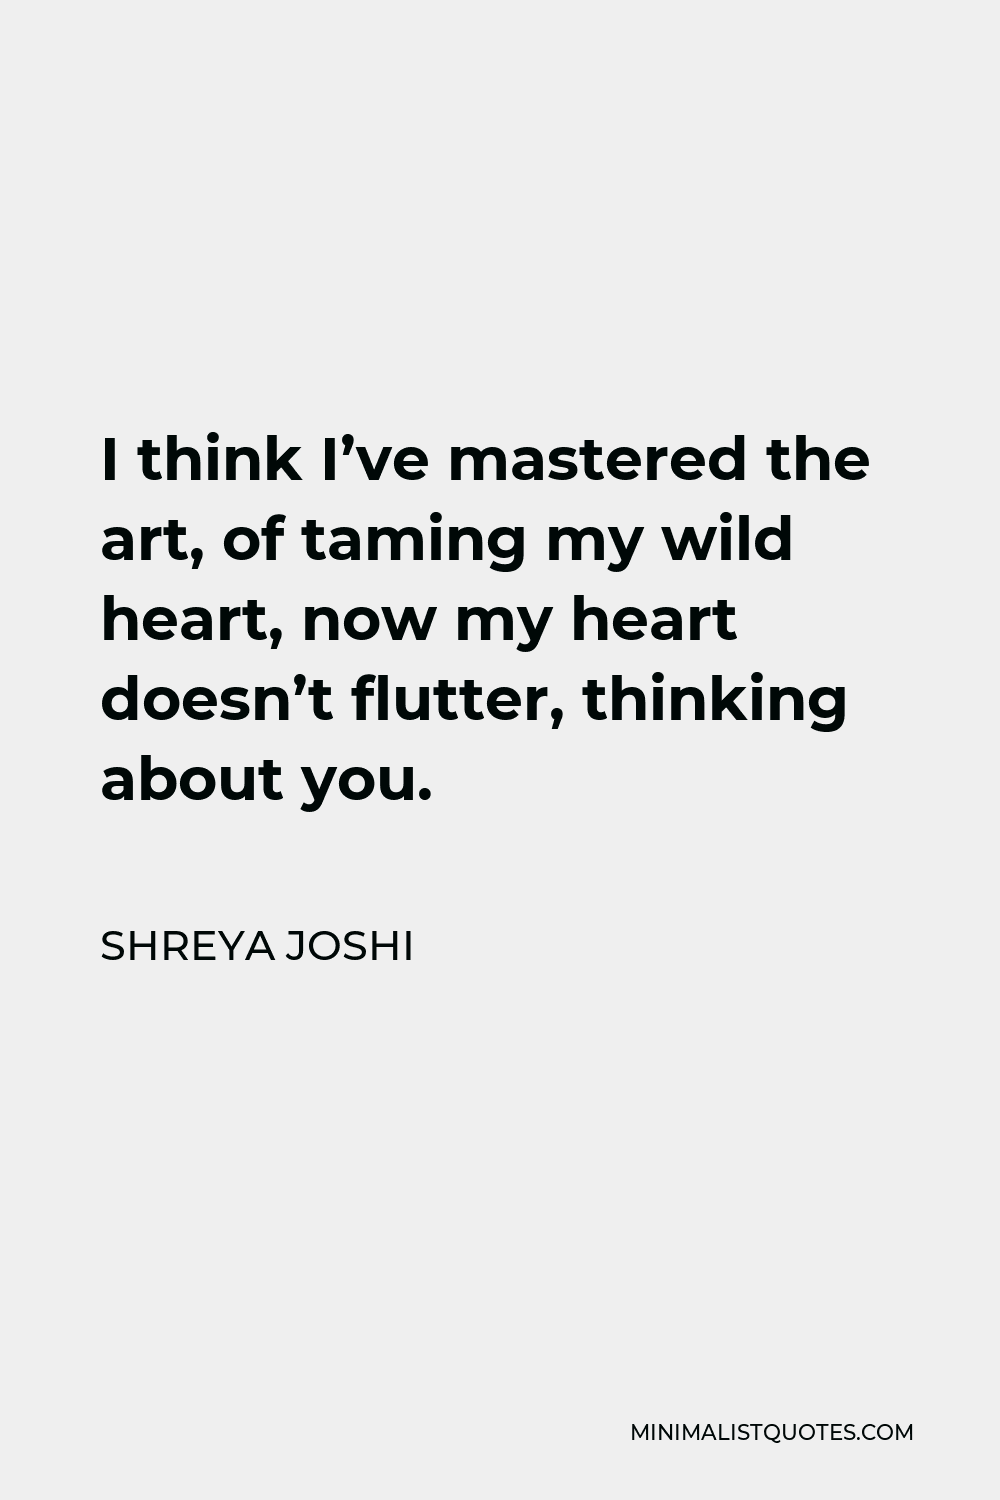 Shreya Joshi Quote - I think I’ve mastered the art, of taming my wild heart, now my heart doesn’t flutter, thinking about you.